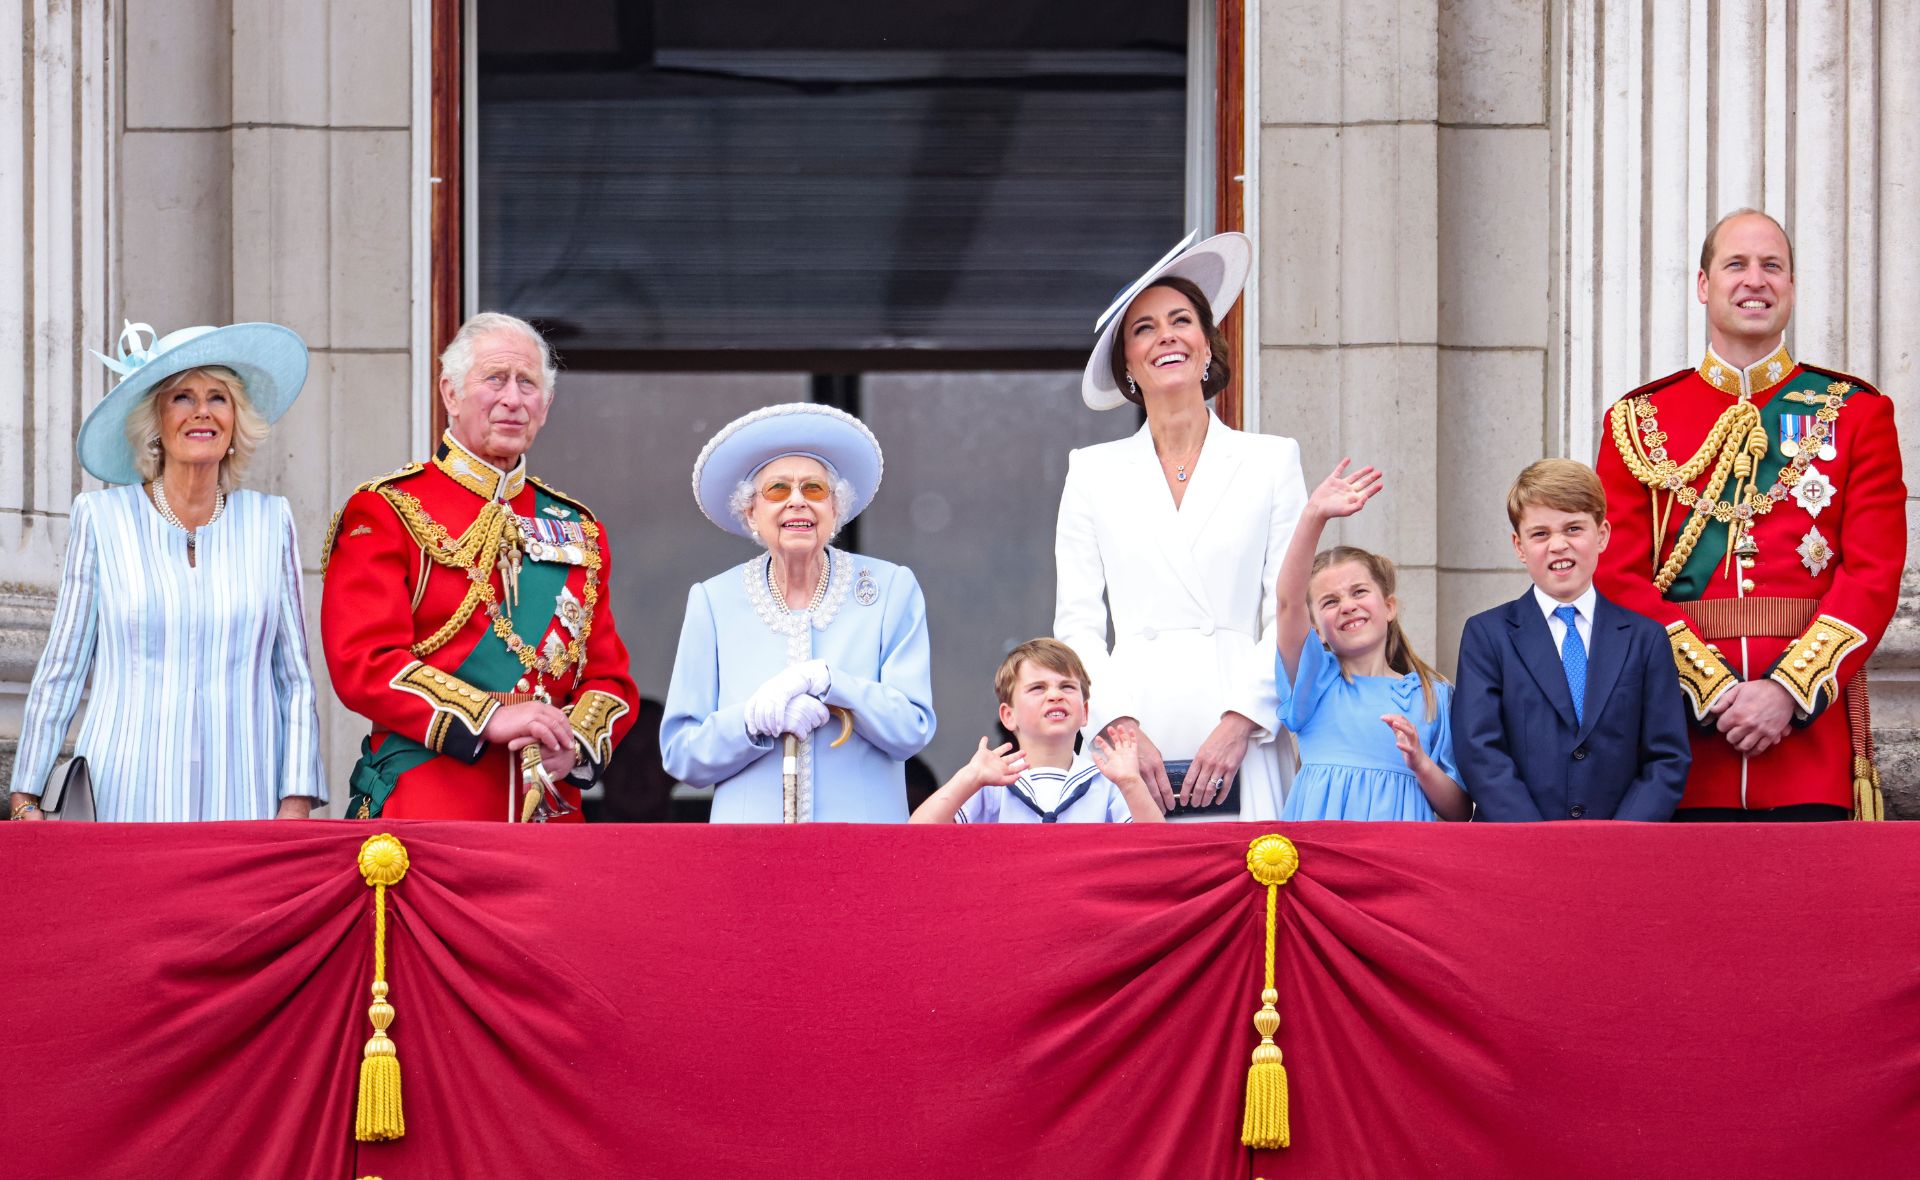 The Queen’s profound Platinum Jubilee celebrations presented a much-needed message of togetherness